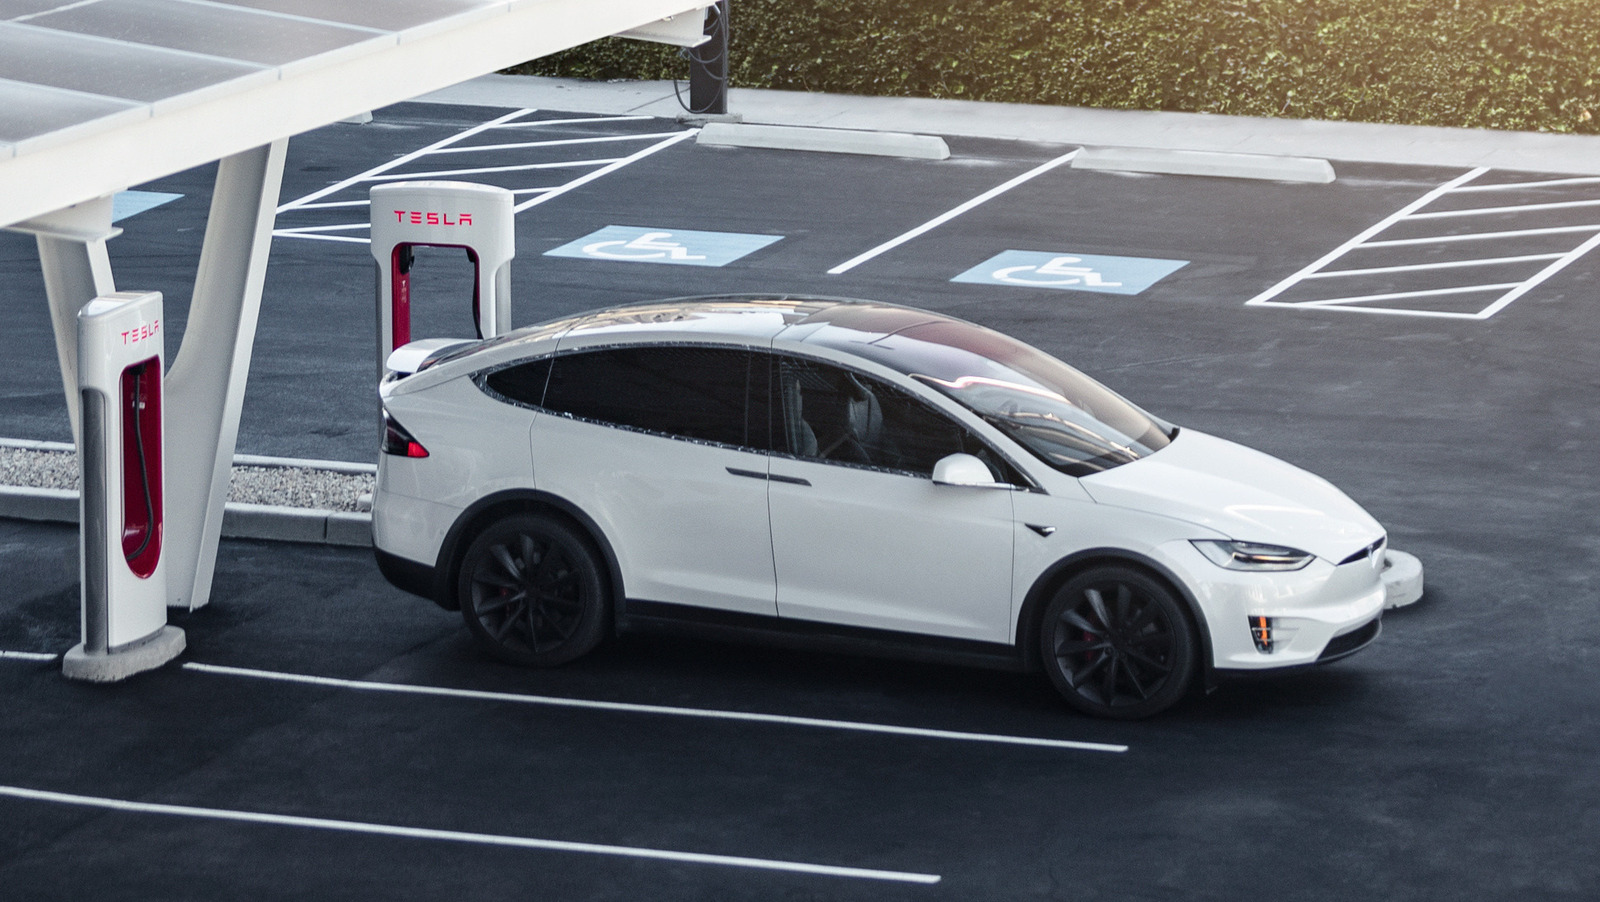 Tesla Hikes Model X And Model S Prices And Brings Back An Old Supercharger Perk – SlashGear